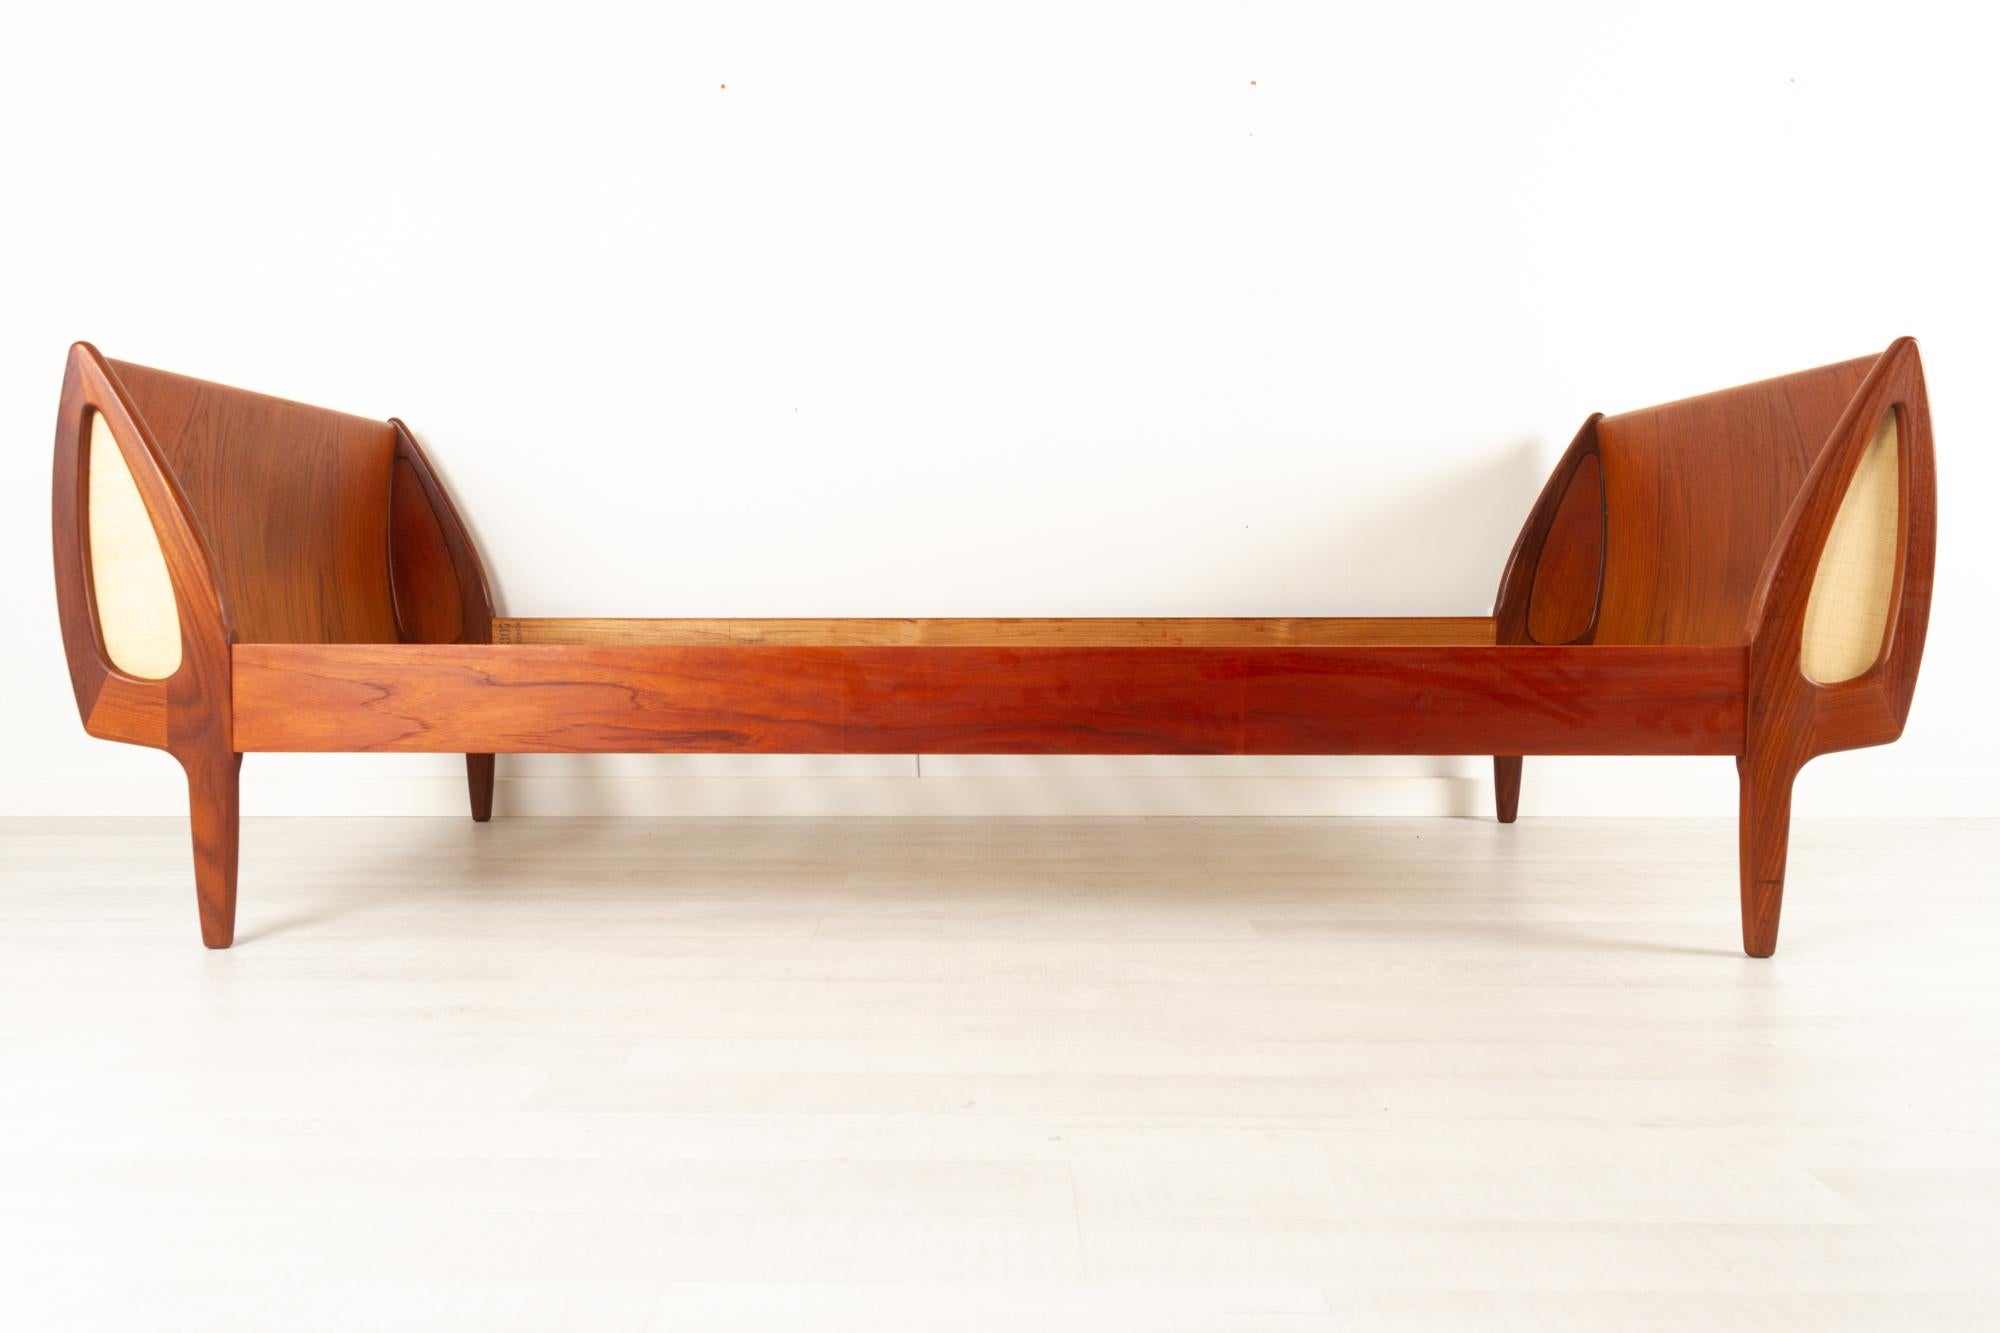 Vintage Danish teak daybed by Sigfred Omann for Ølholm Møbelfabrik, 1960s
Mid-Century Modern sleigh bed in teak with identical curved head- and footboard. Sculptural and organically shaped legs in solid dark teak. Suitable as daybed, bed or